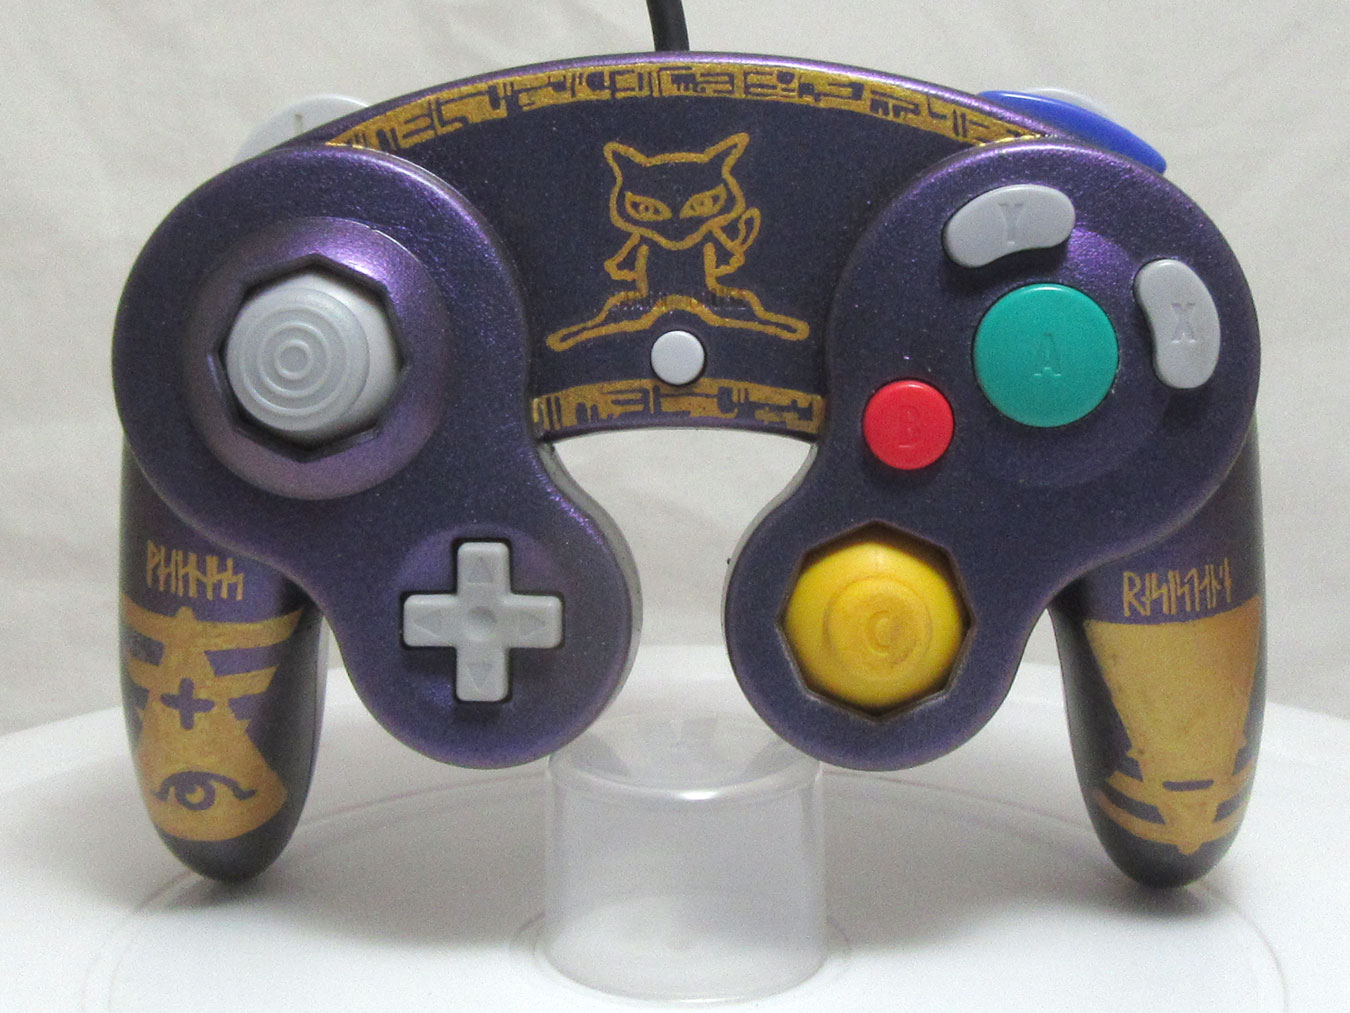 Ancient Mew controllers